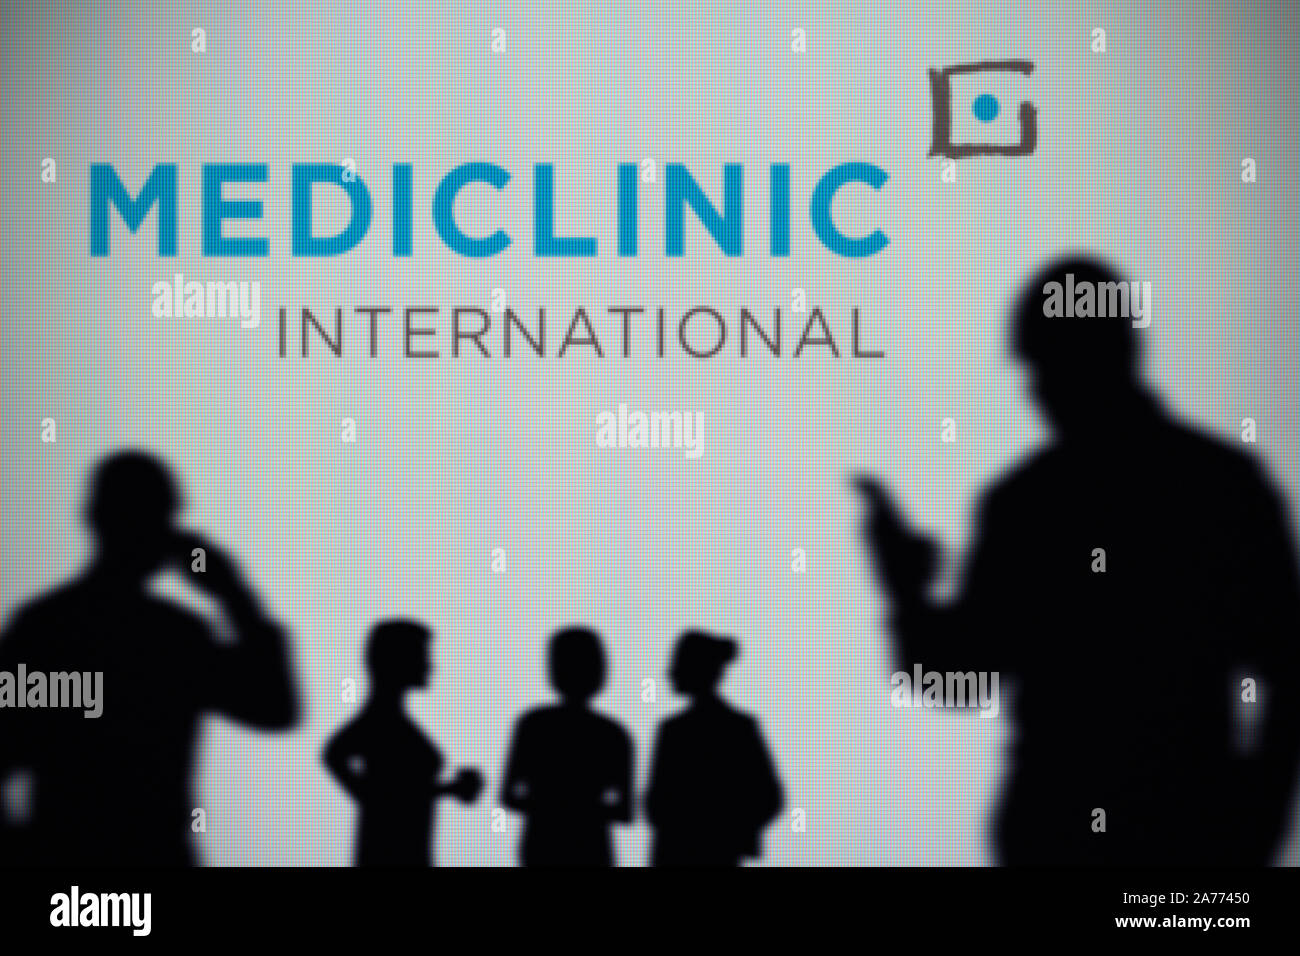 The Mediclinic International logo is seen on an LED screen in the background while a silhouetted person uses a smartphone (Editorial use only) Stock Photo